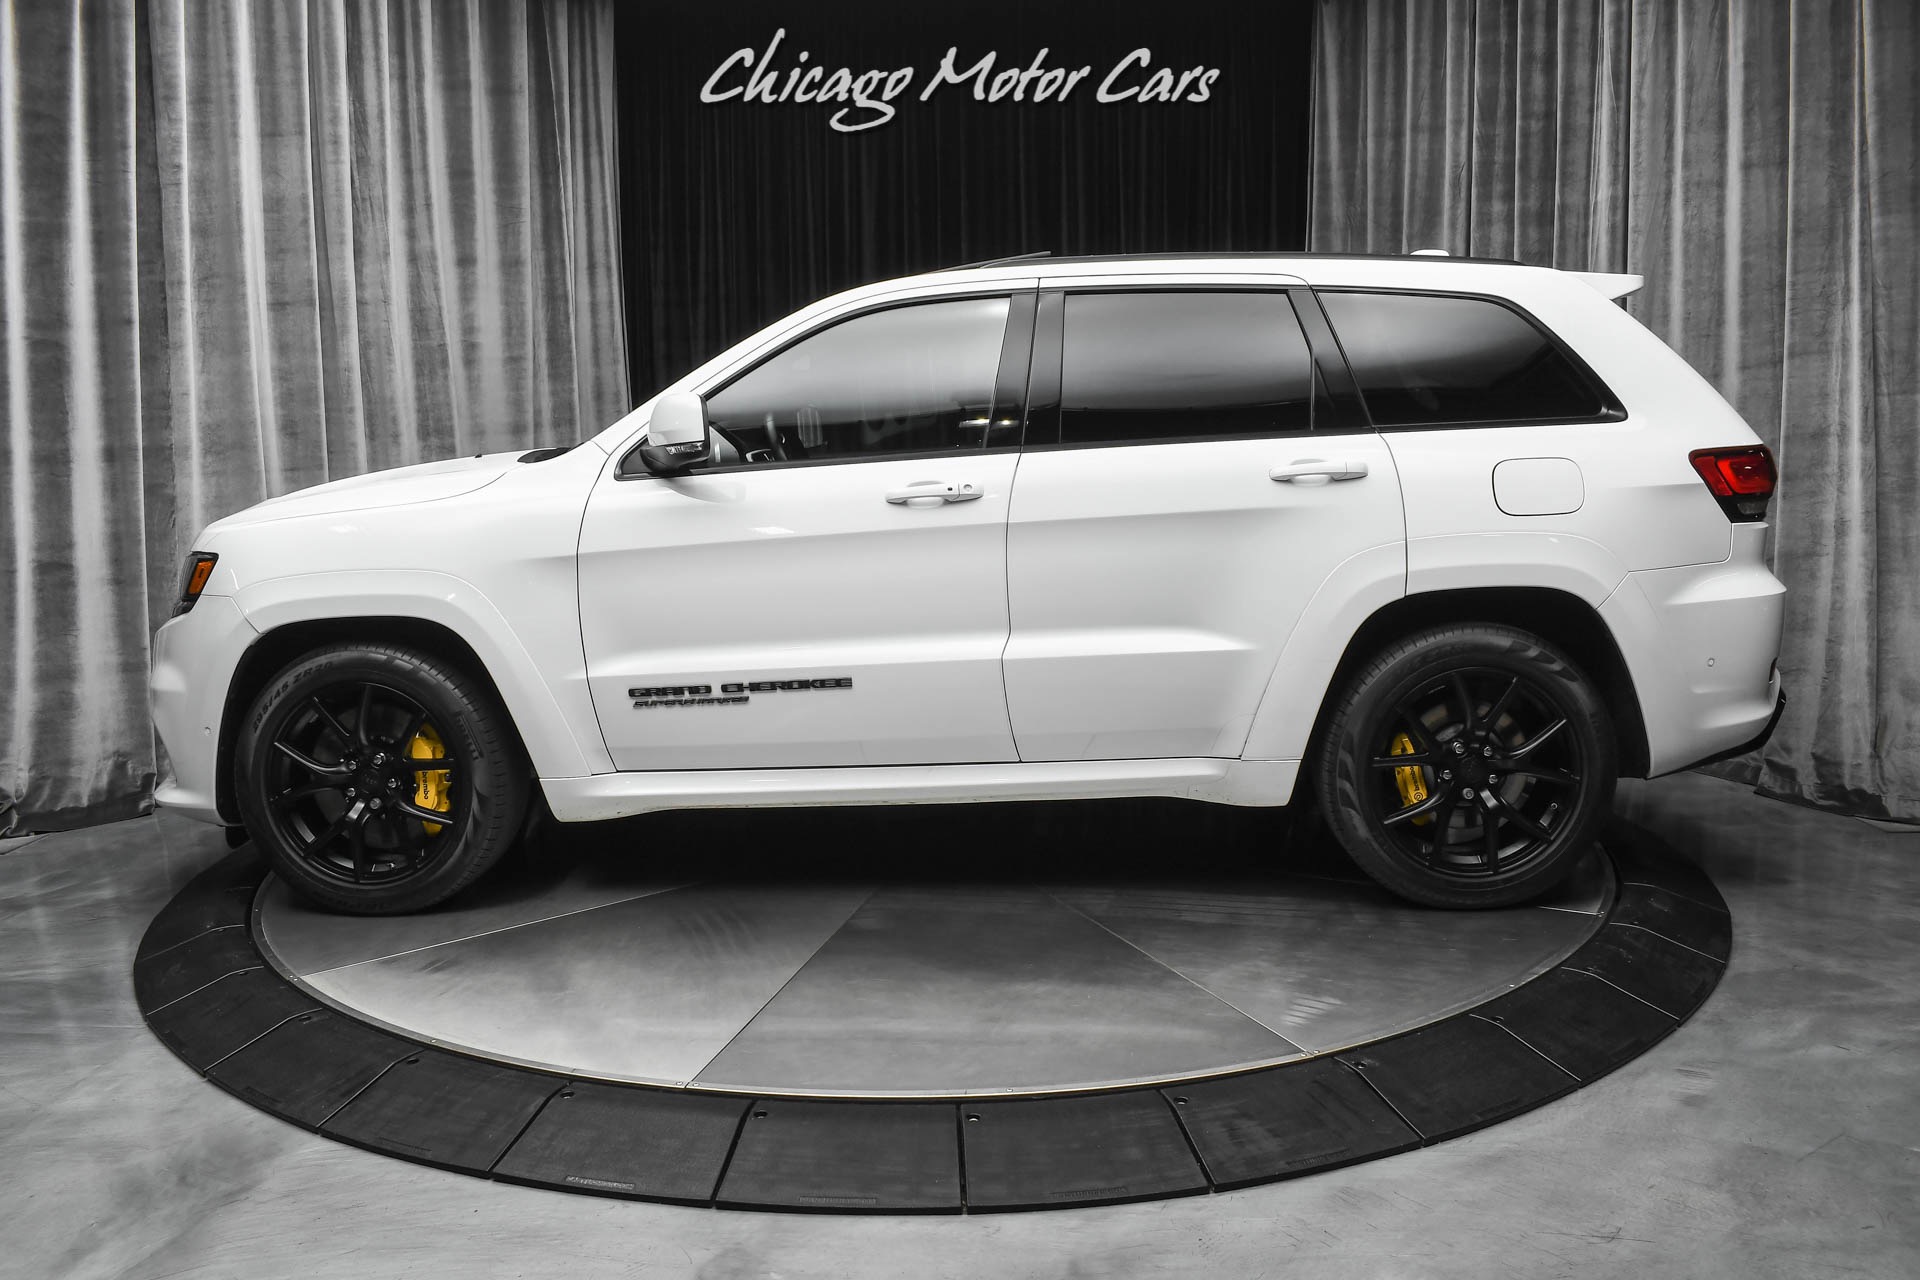 Used-2018-Jeep-Grand-Cherokee-Trackhawk-98kMSRP-Signature-Leather-Package-Pano-Sunroof